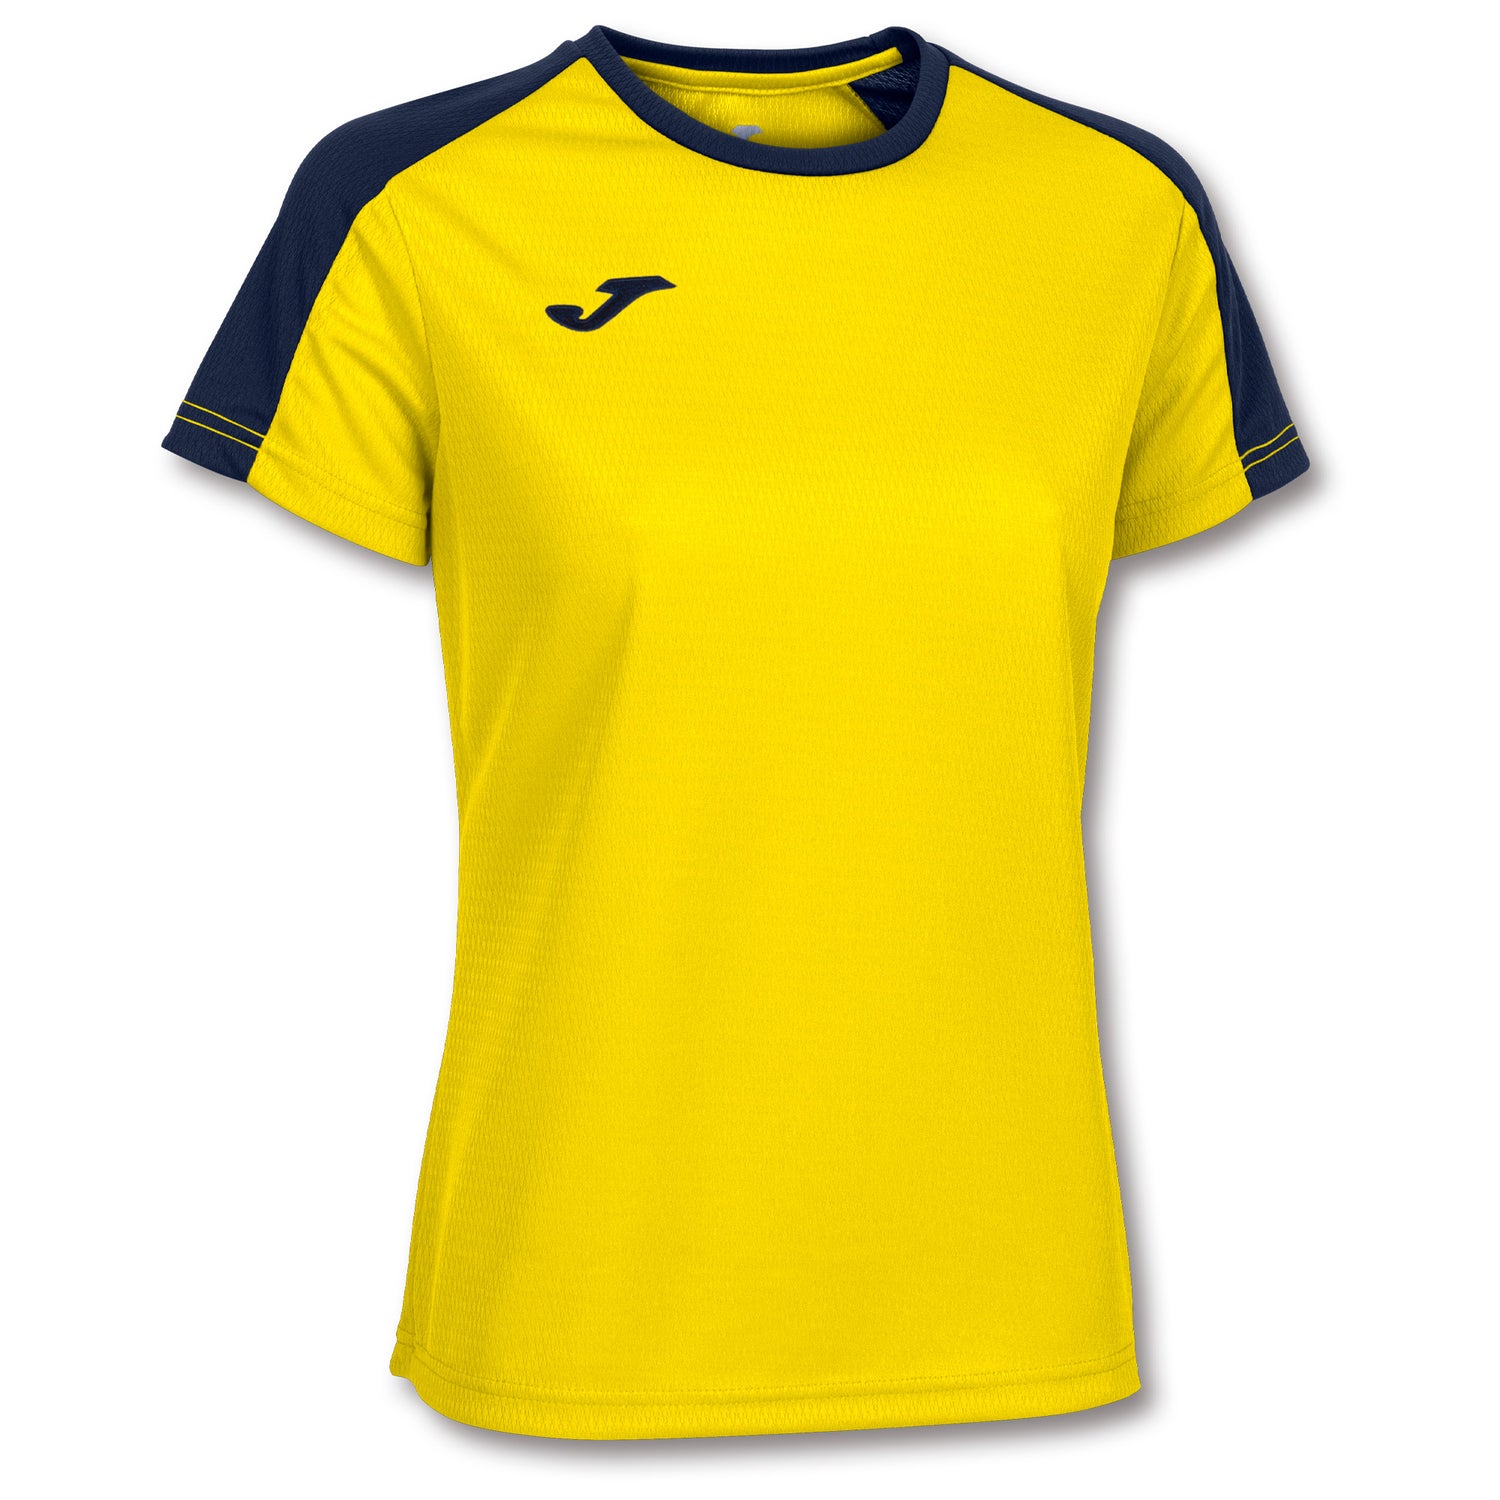 Joma Soccer Jersey available in Joma Canada Store. Customize your teamwear with sponsors and numbers. Joma is shipping in Canada. For club offers contact us. 